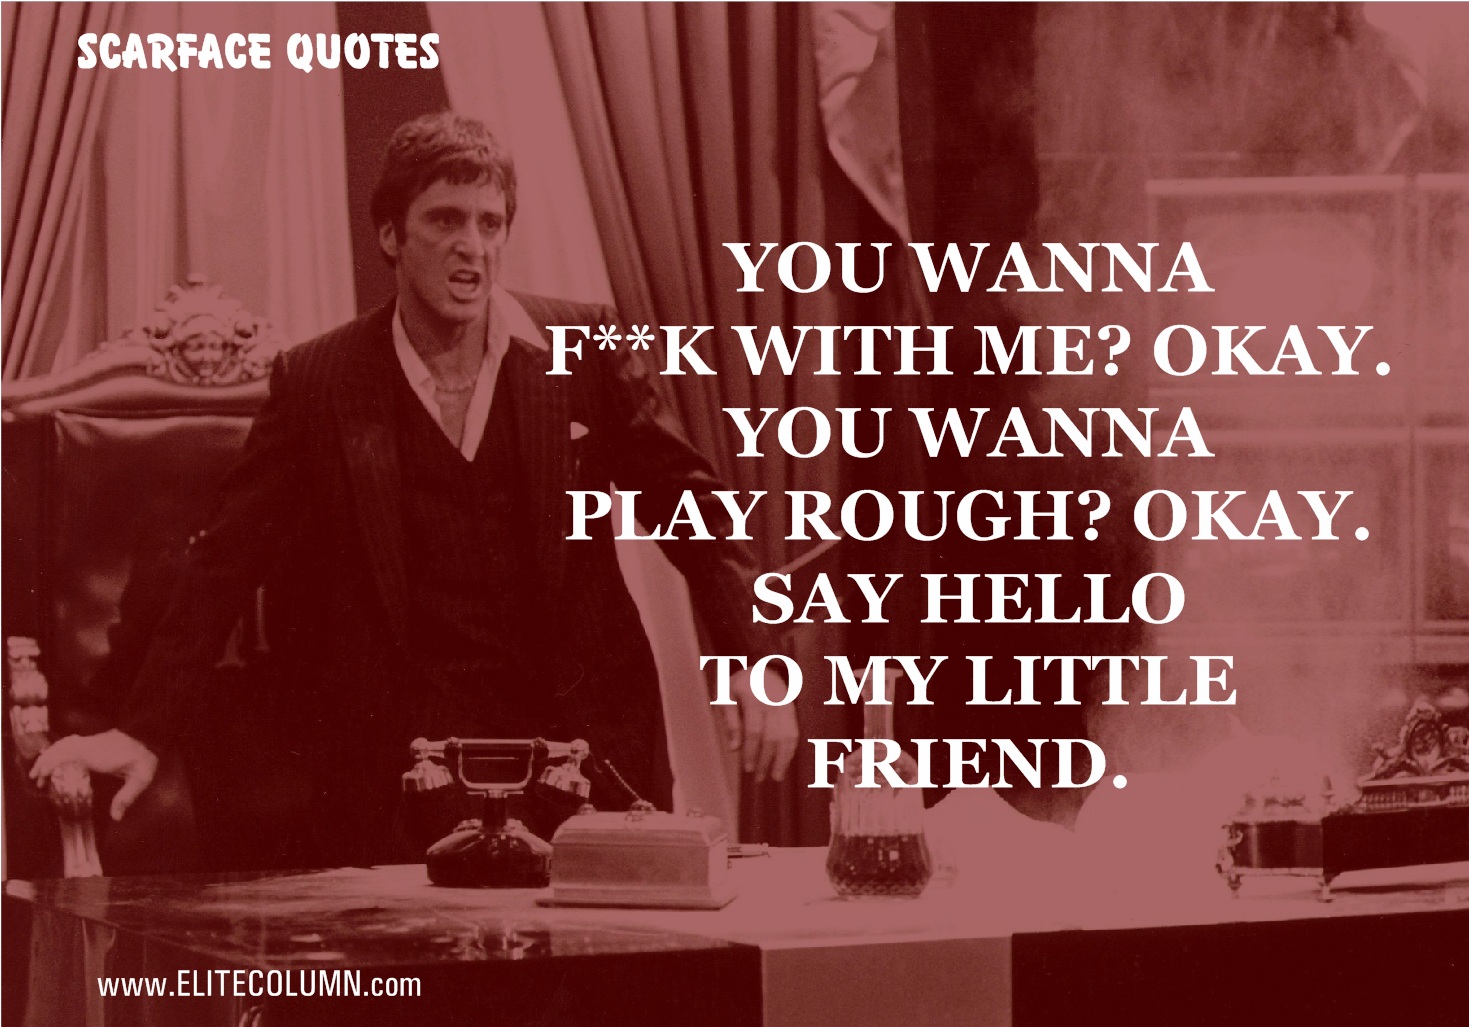 Badass scarface quotes